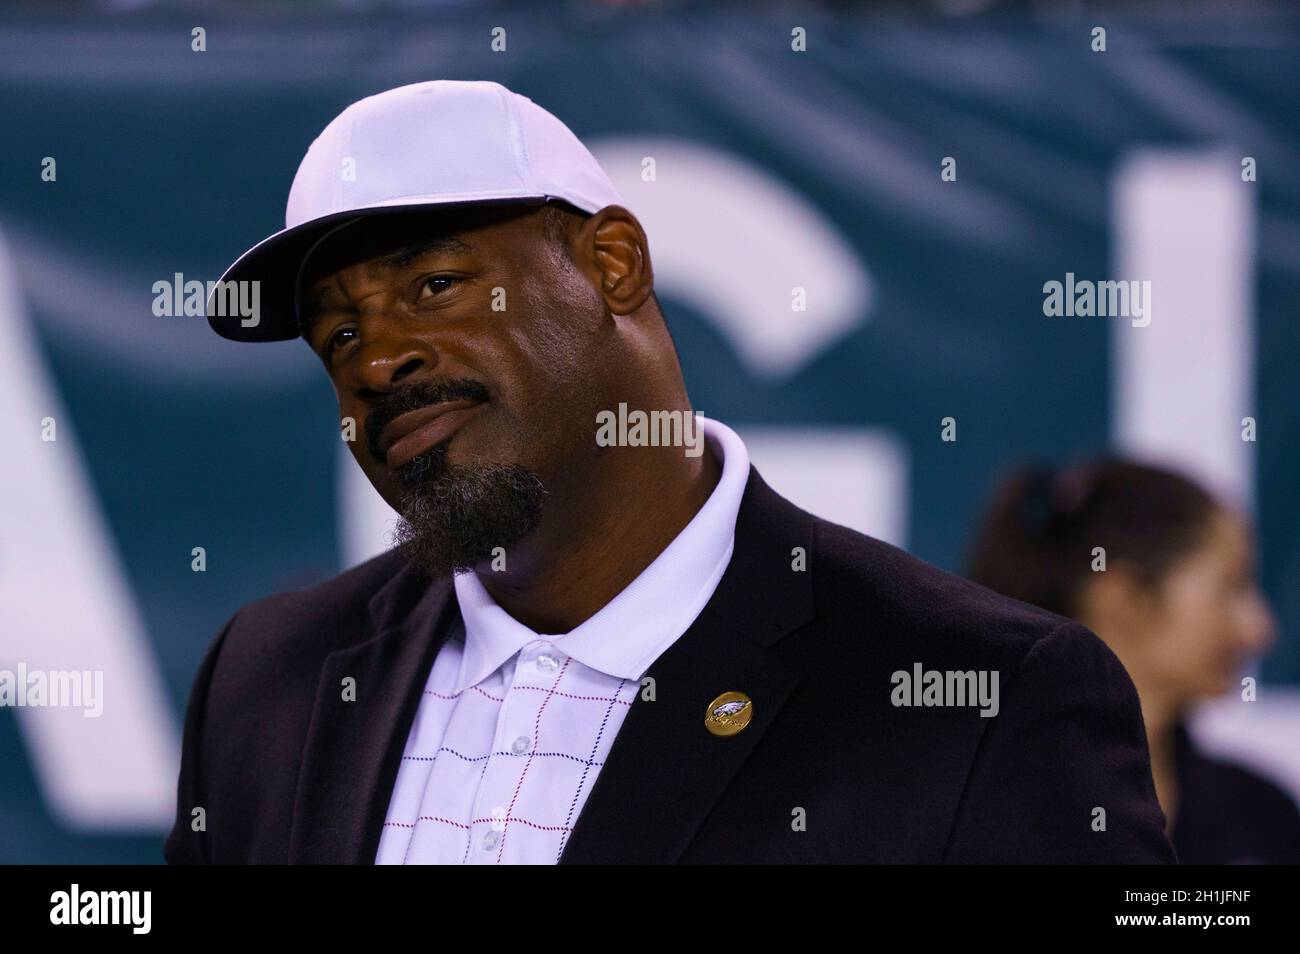 Philadelphia, Pennsylvania, USA. 14th Oct, 2021. Former Philadelphia Eagles Donovan McNabb looks on during the NFL game between the Tampa Bay Buccaneers and the Philadelphia Eagles at Lincoln Financial Field in Philadelphia, Pennsylvania. Christopher Szagola/CSM/Alamy Live News Stock Photo